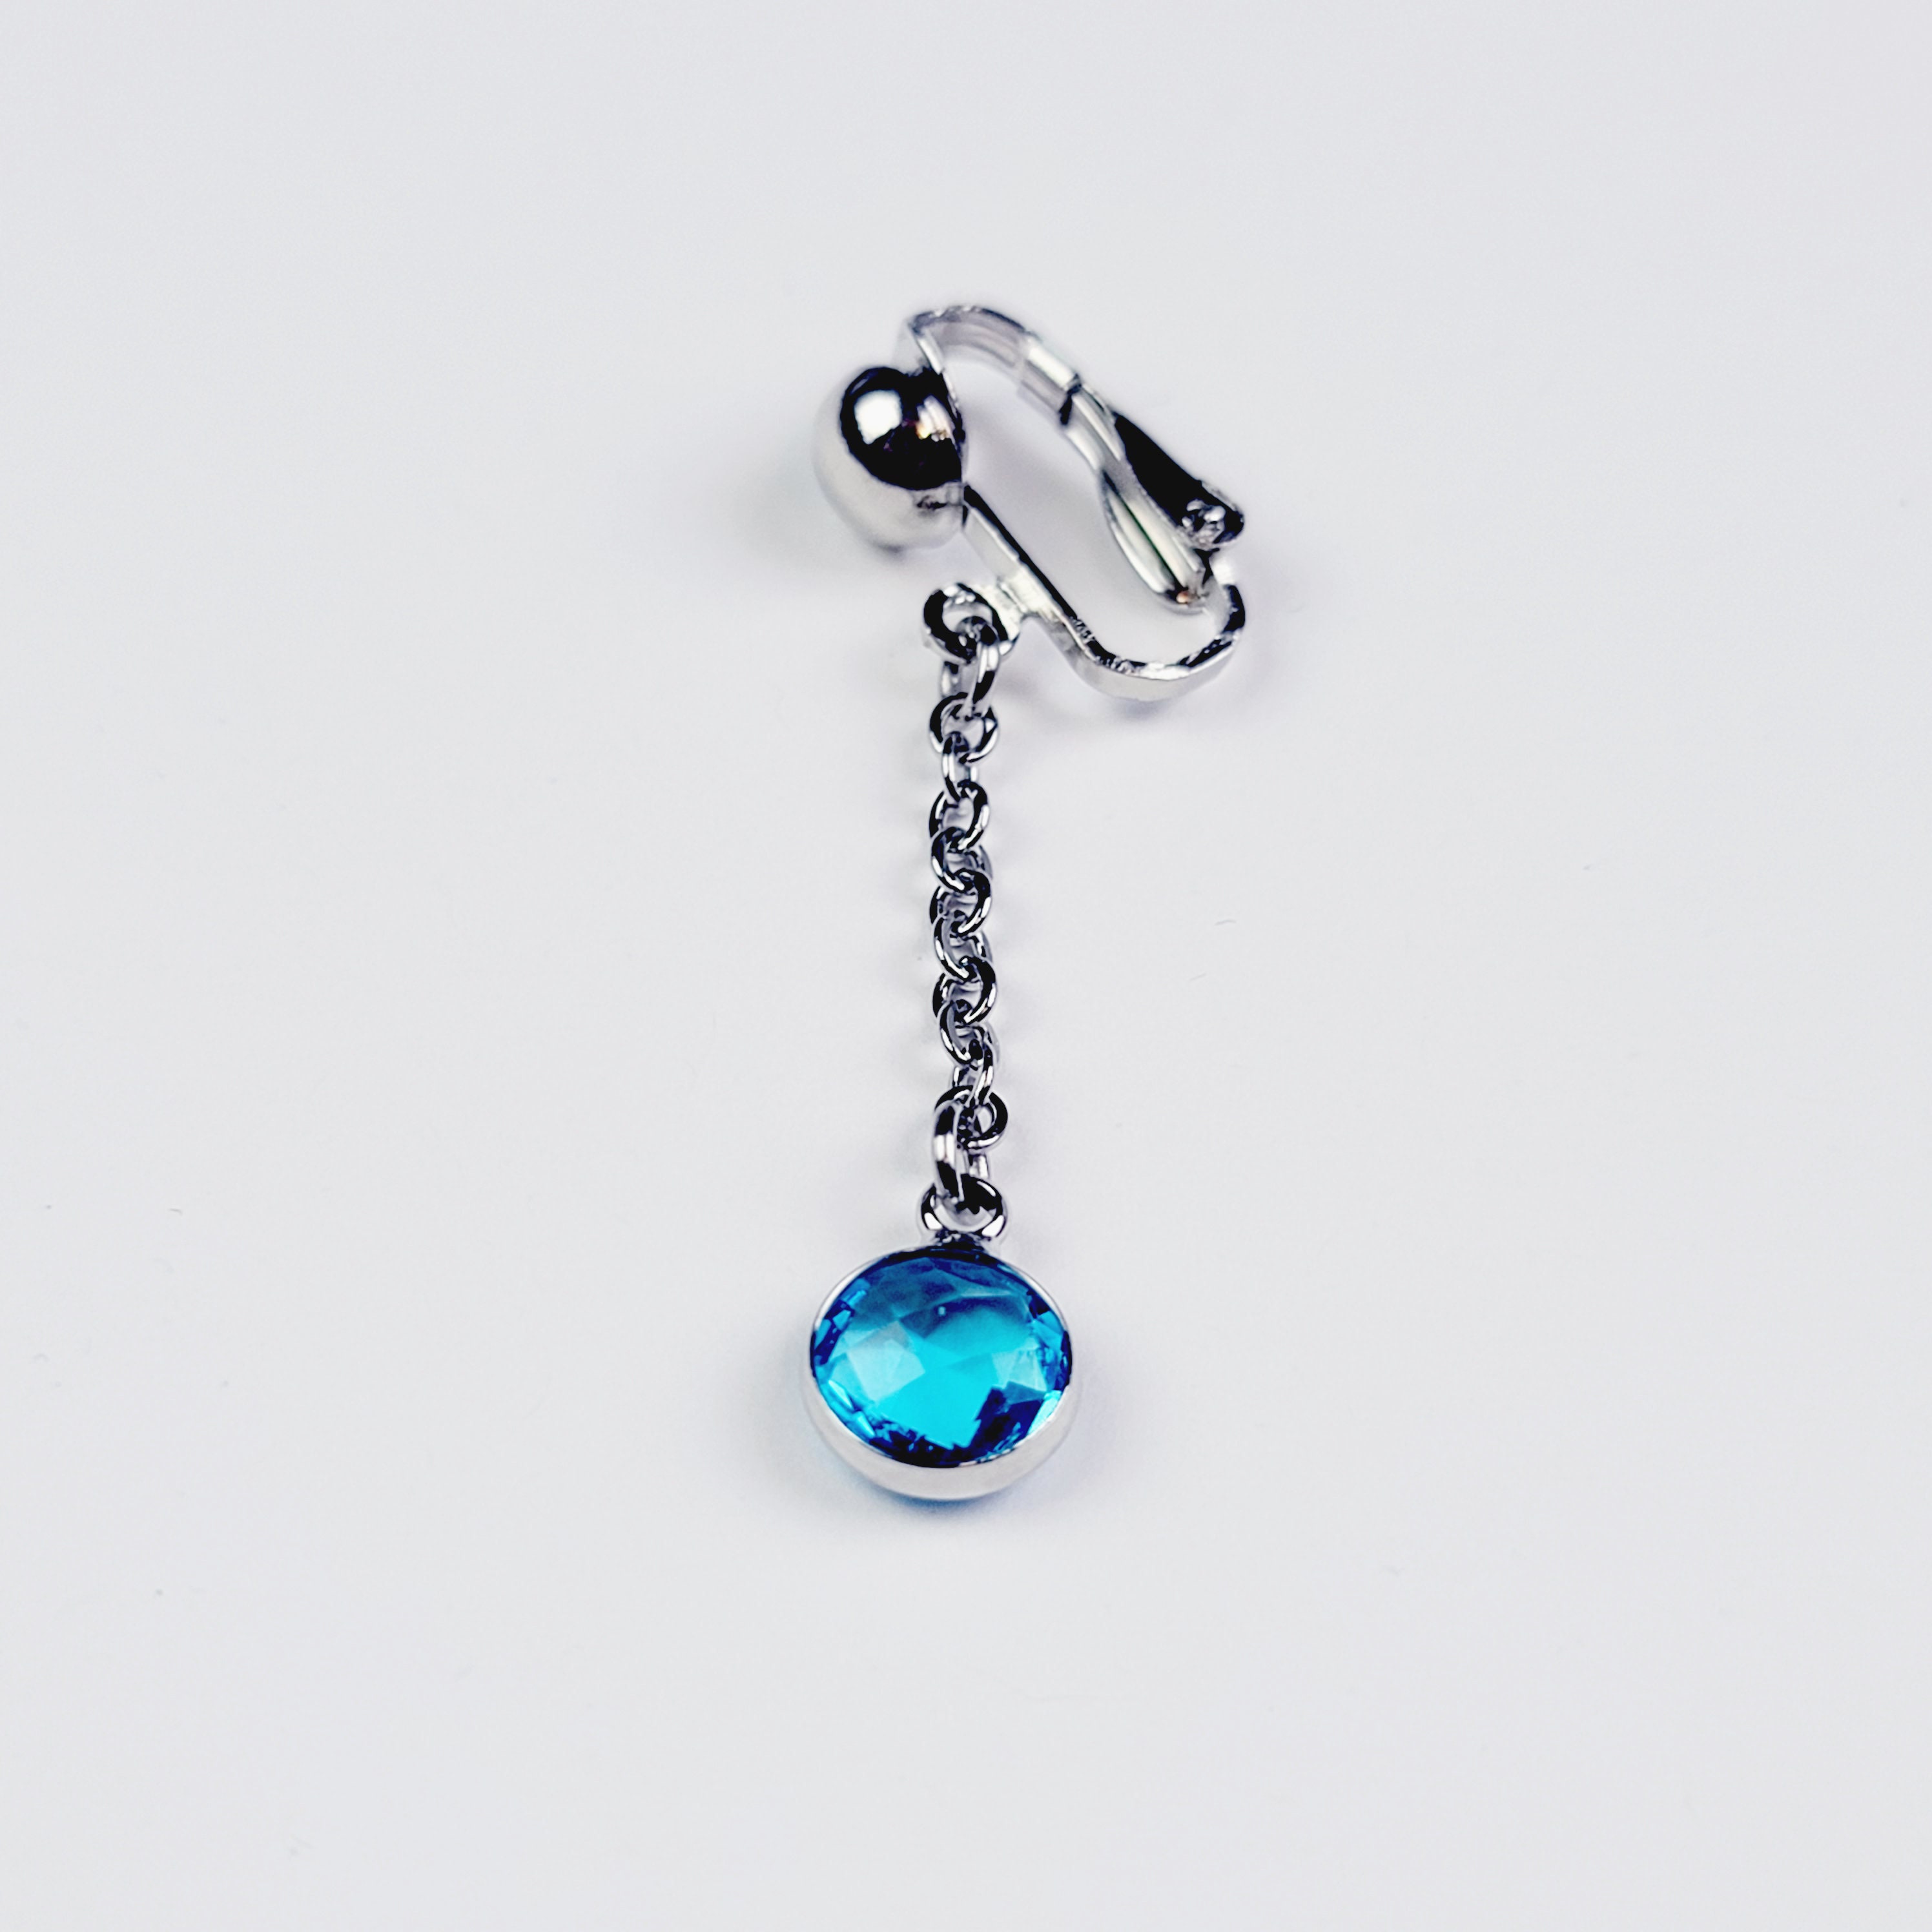 Non Piercing VCH Clip with Stainless Steel Chain and Blue Gemstone. Vaginal Clitoral Jewelry, MATURE, BDSM photo